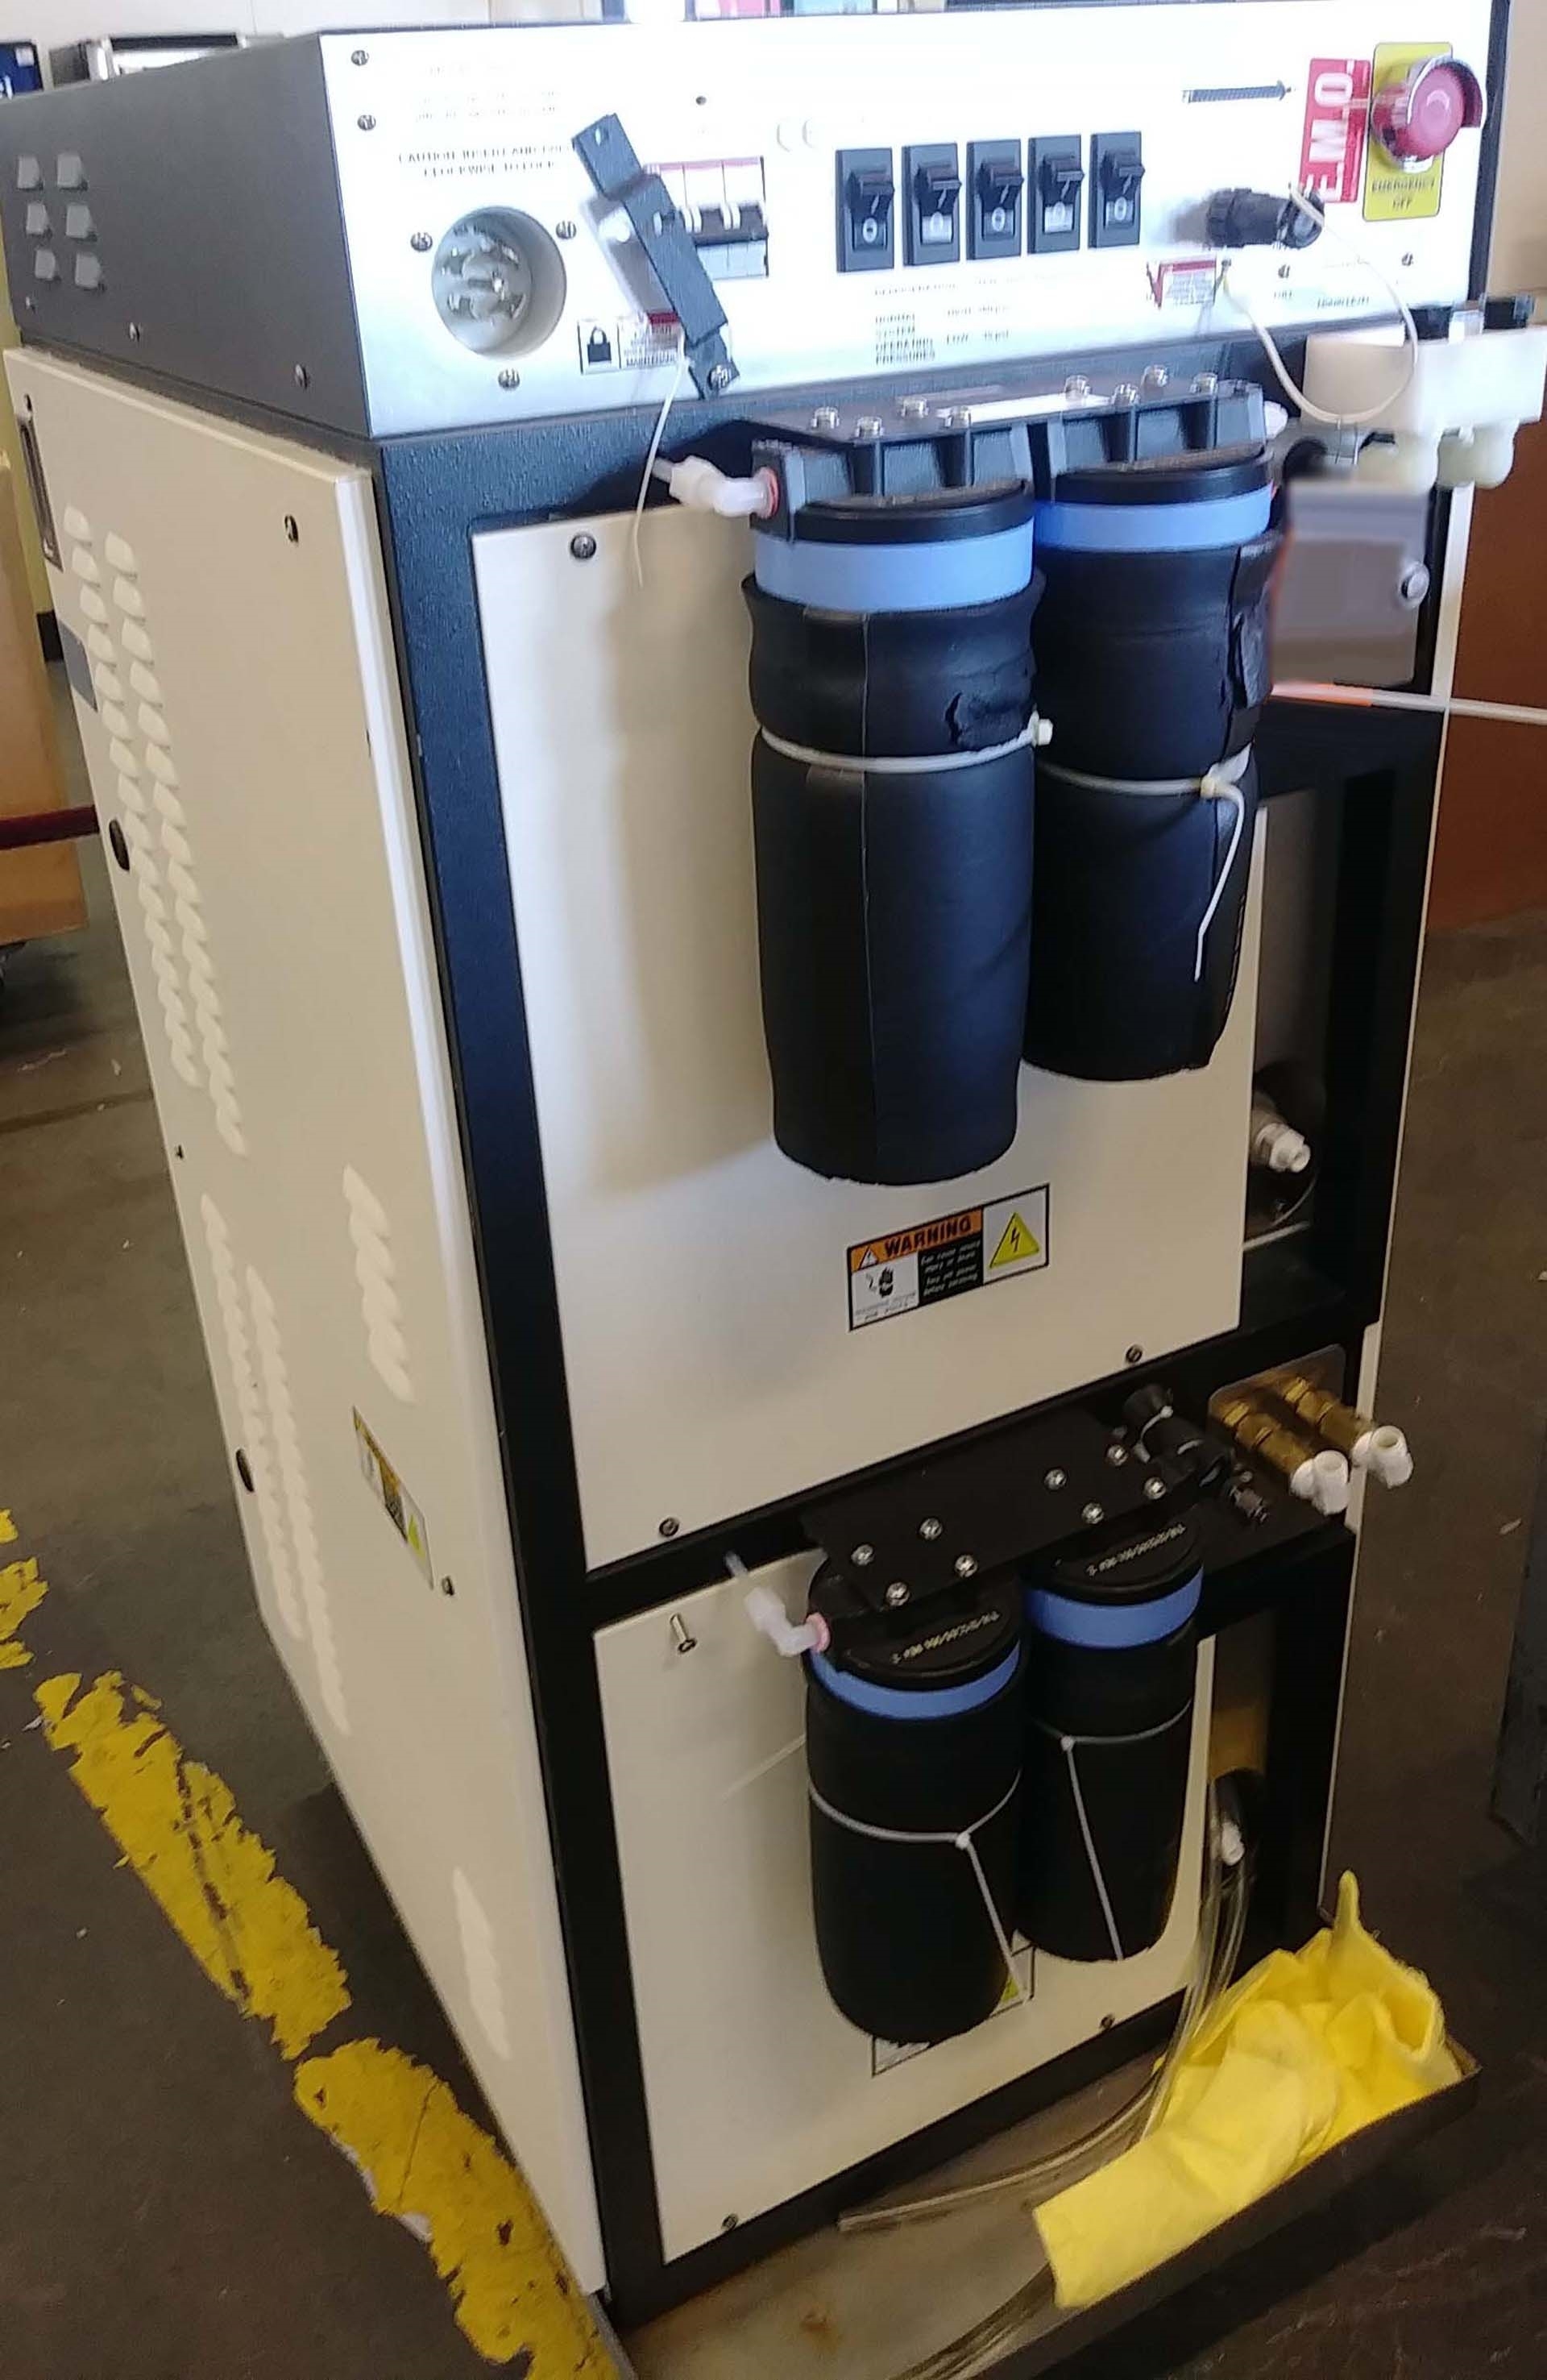 LAM RESEARCH 2080 TCU Chiller used for sale price #9243768 ...